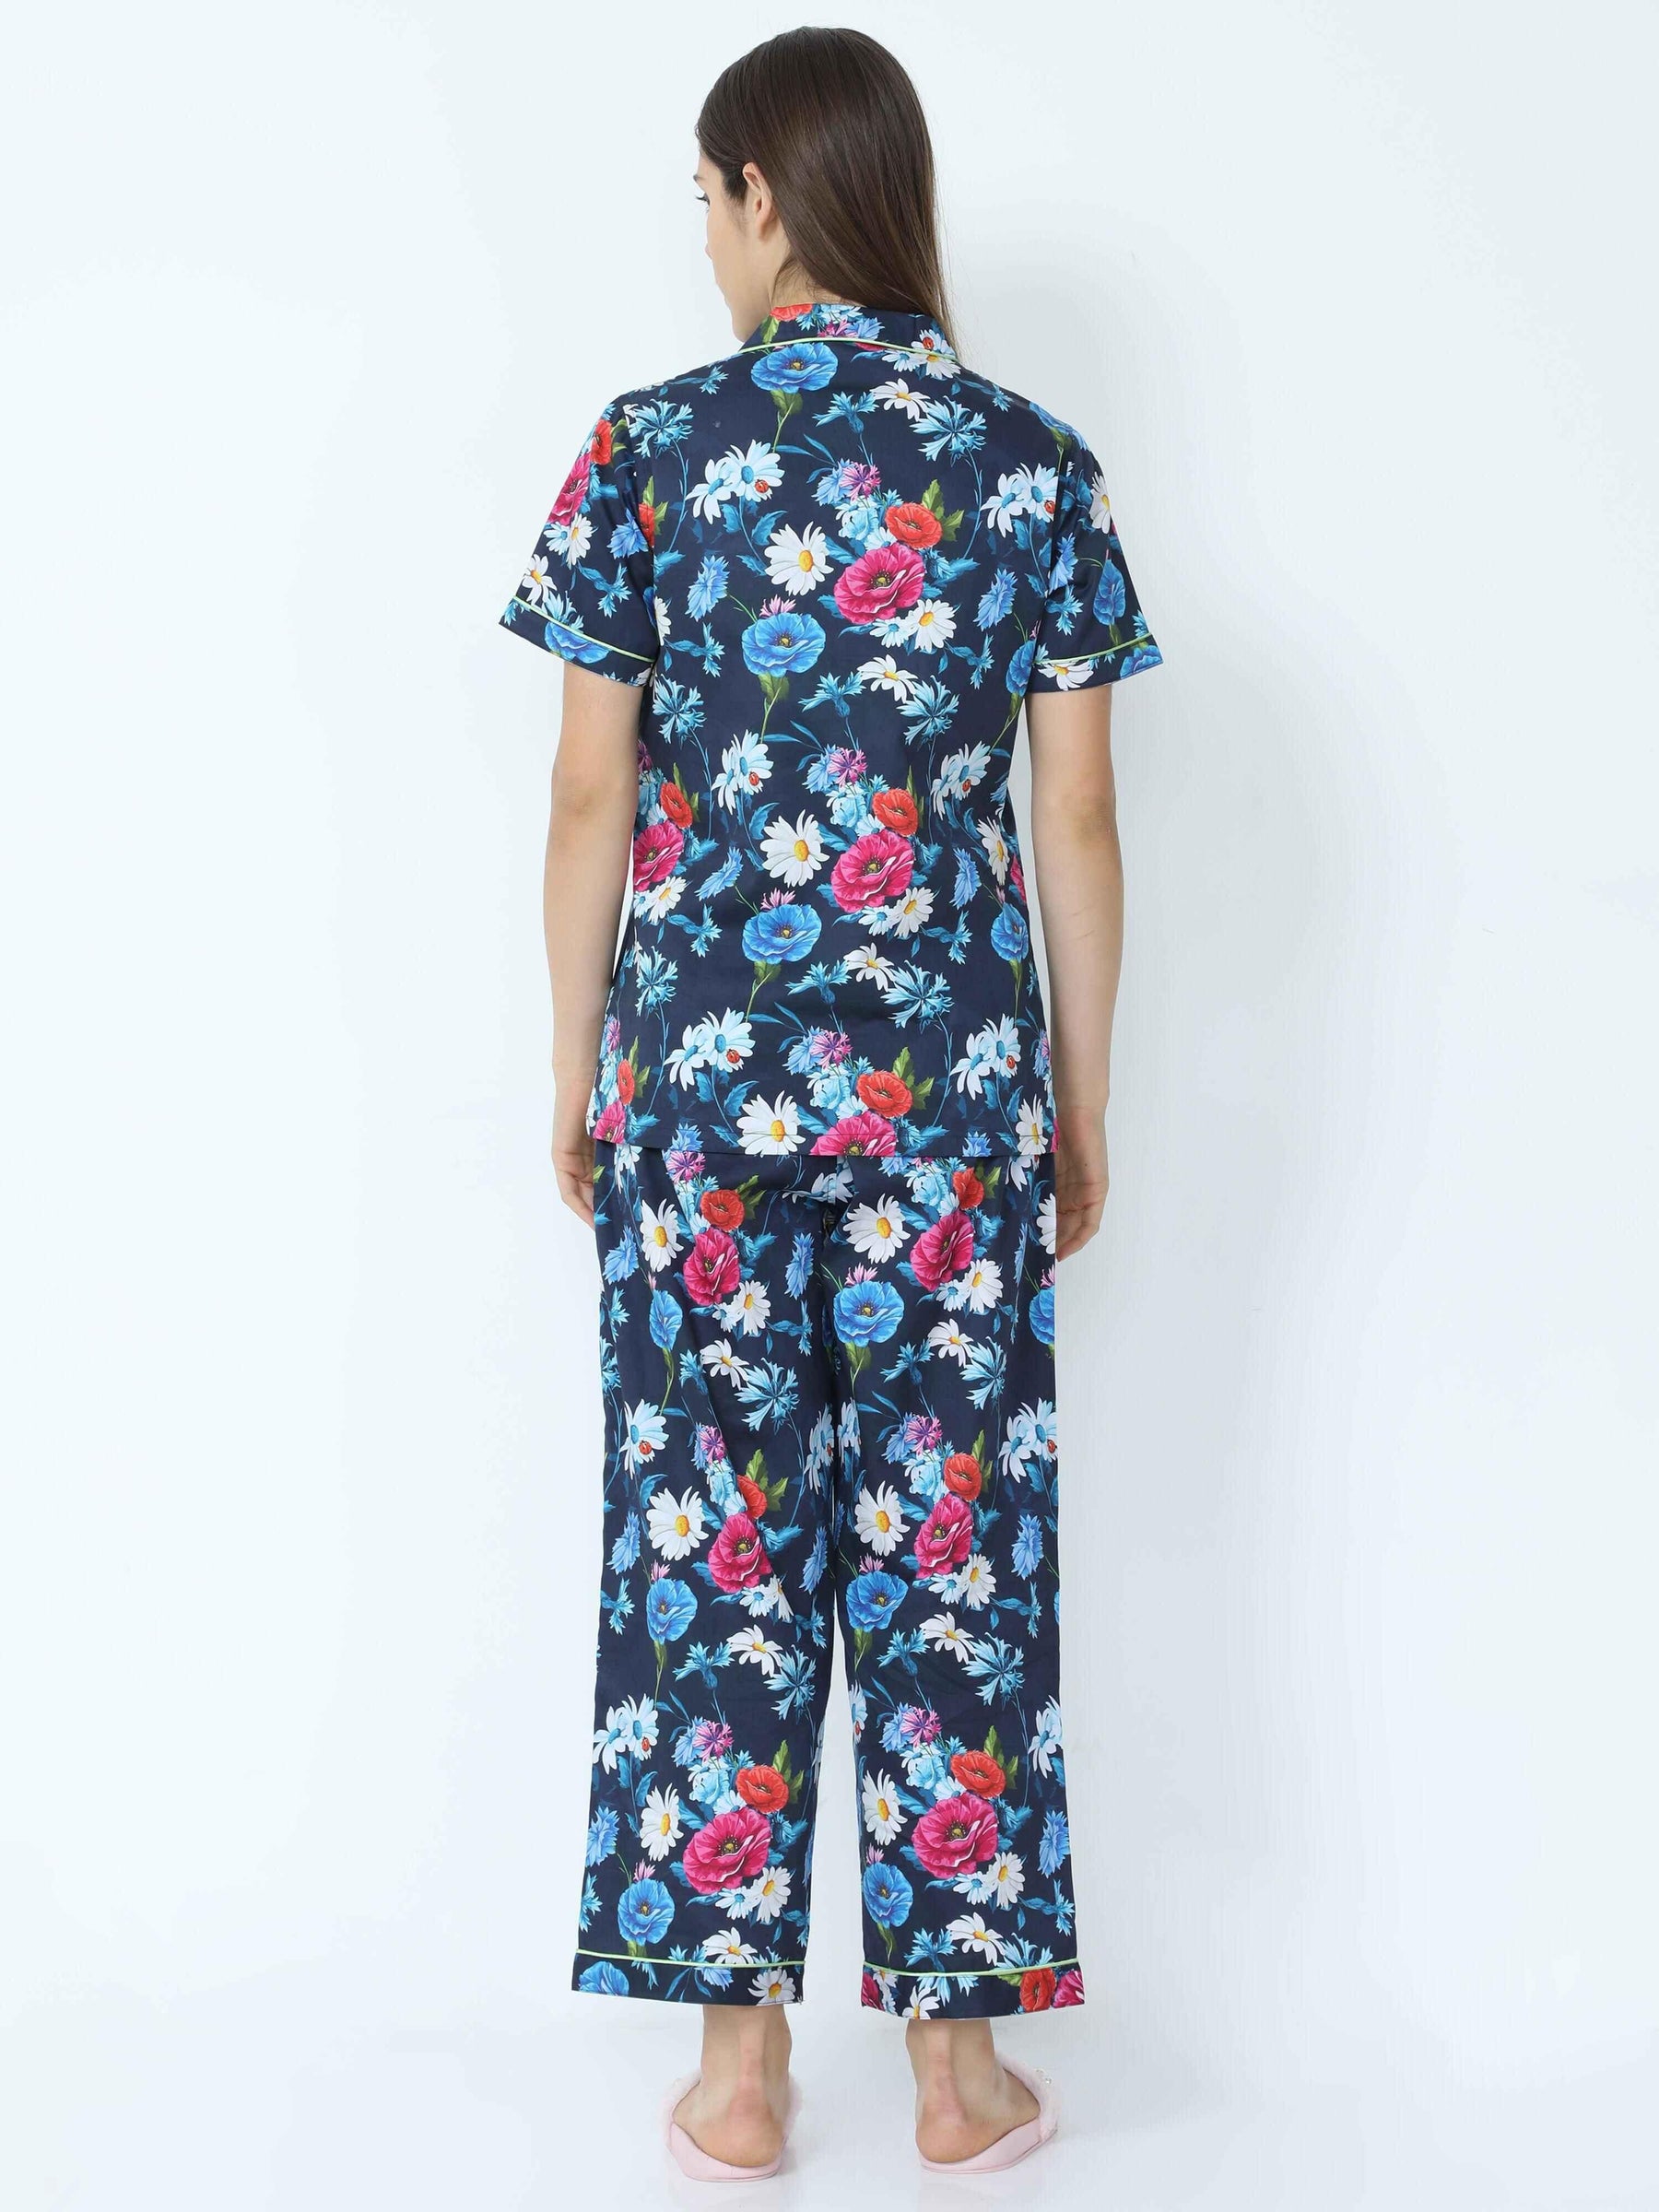 Midnight Blue Floral Printed Night Suit Set